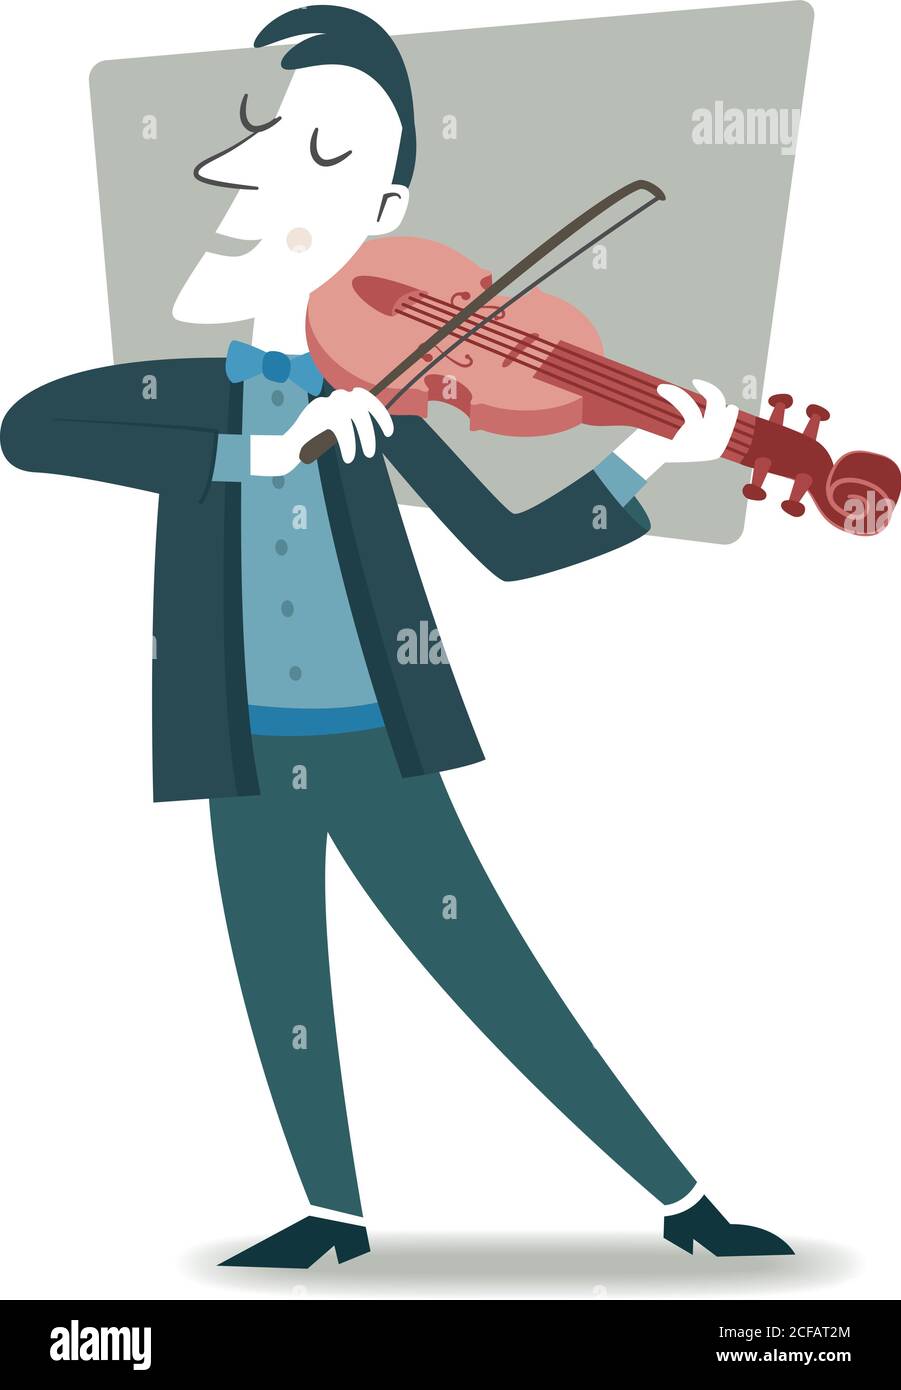 Retro style illustration of a musician playing the violin. Stock Vector